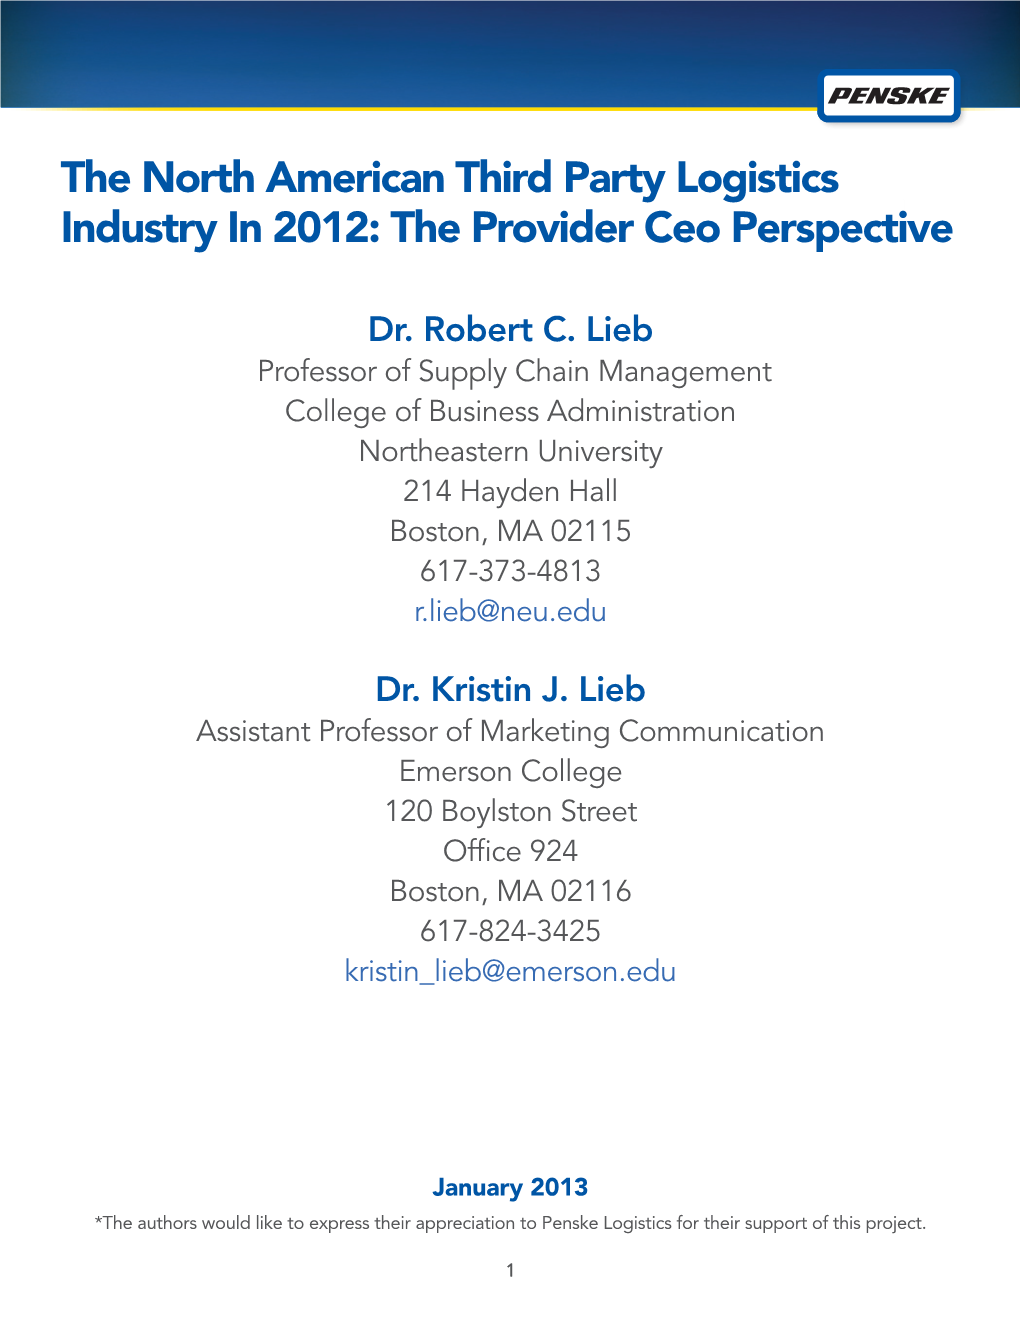 The North American Third Party Logistics Industry in 2012: the Provider Ceo Perspective